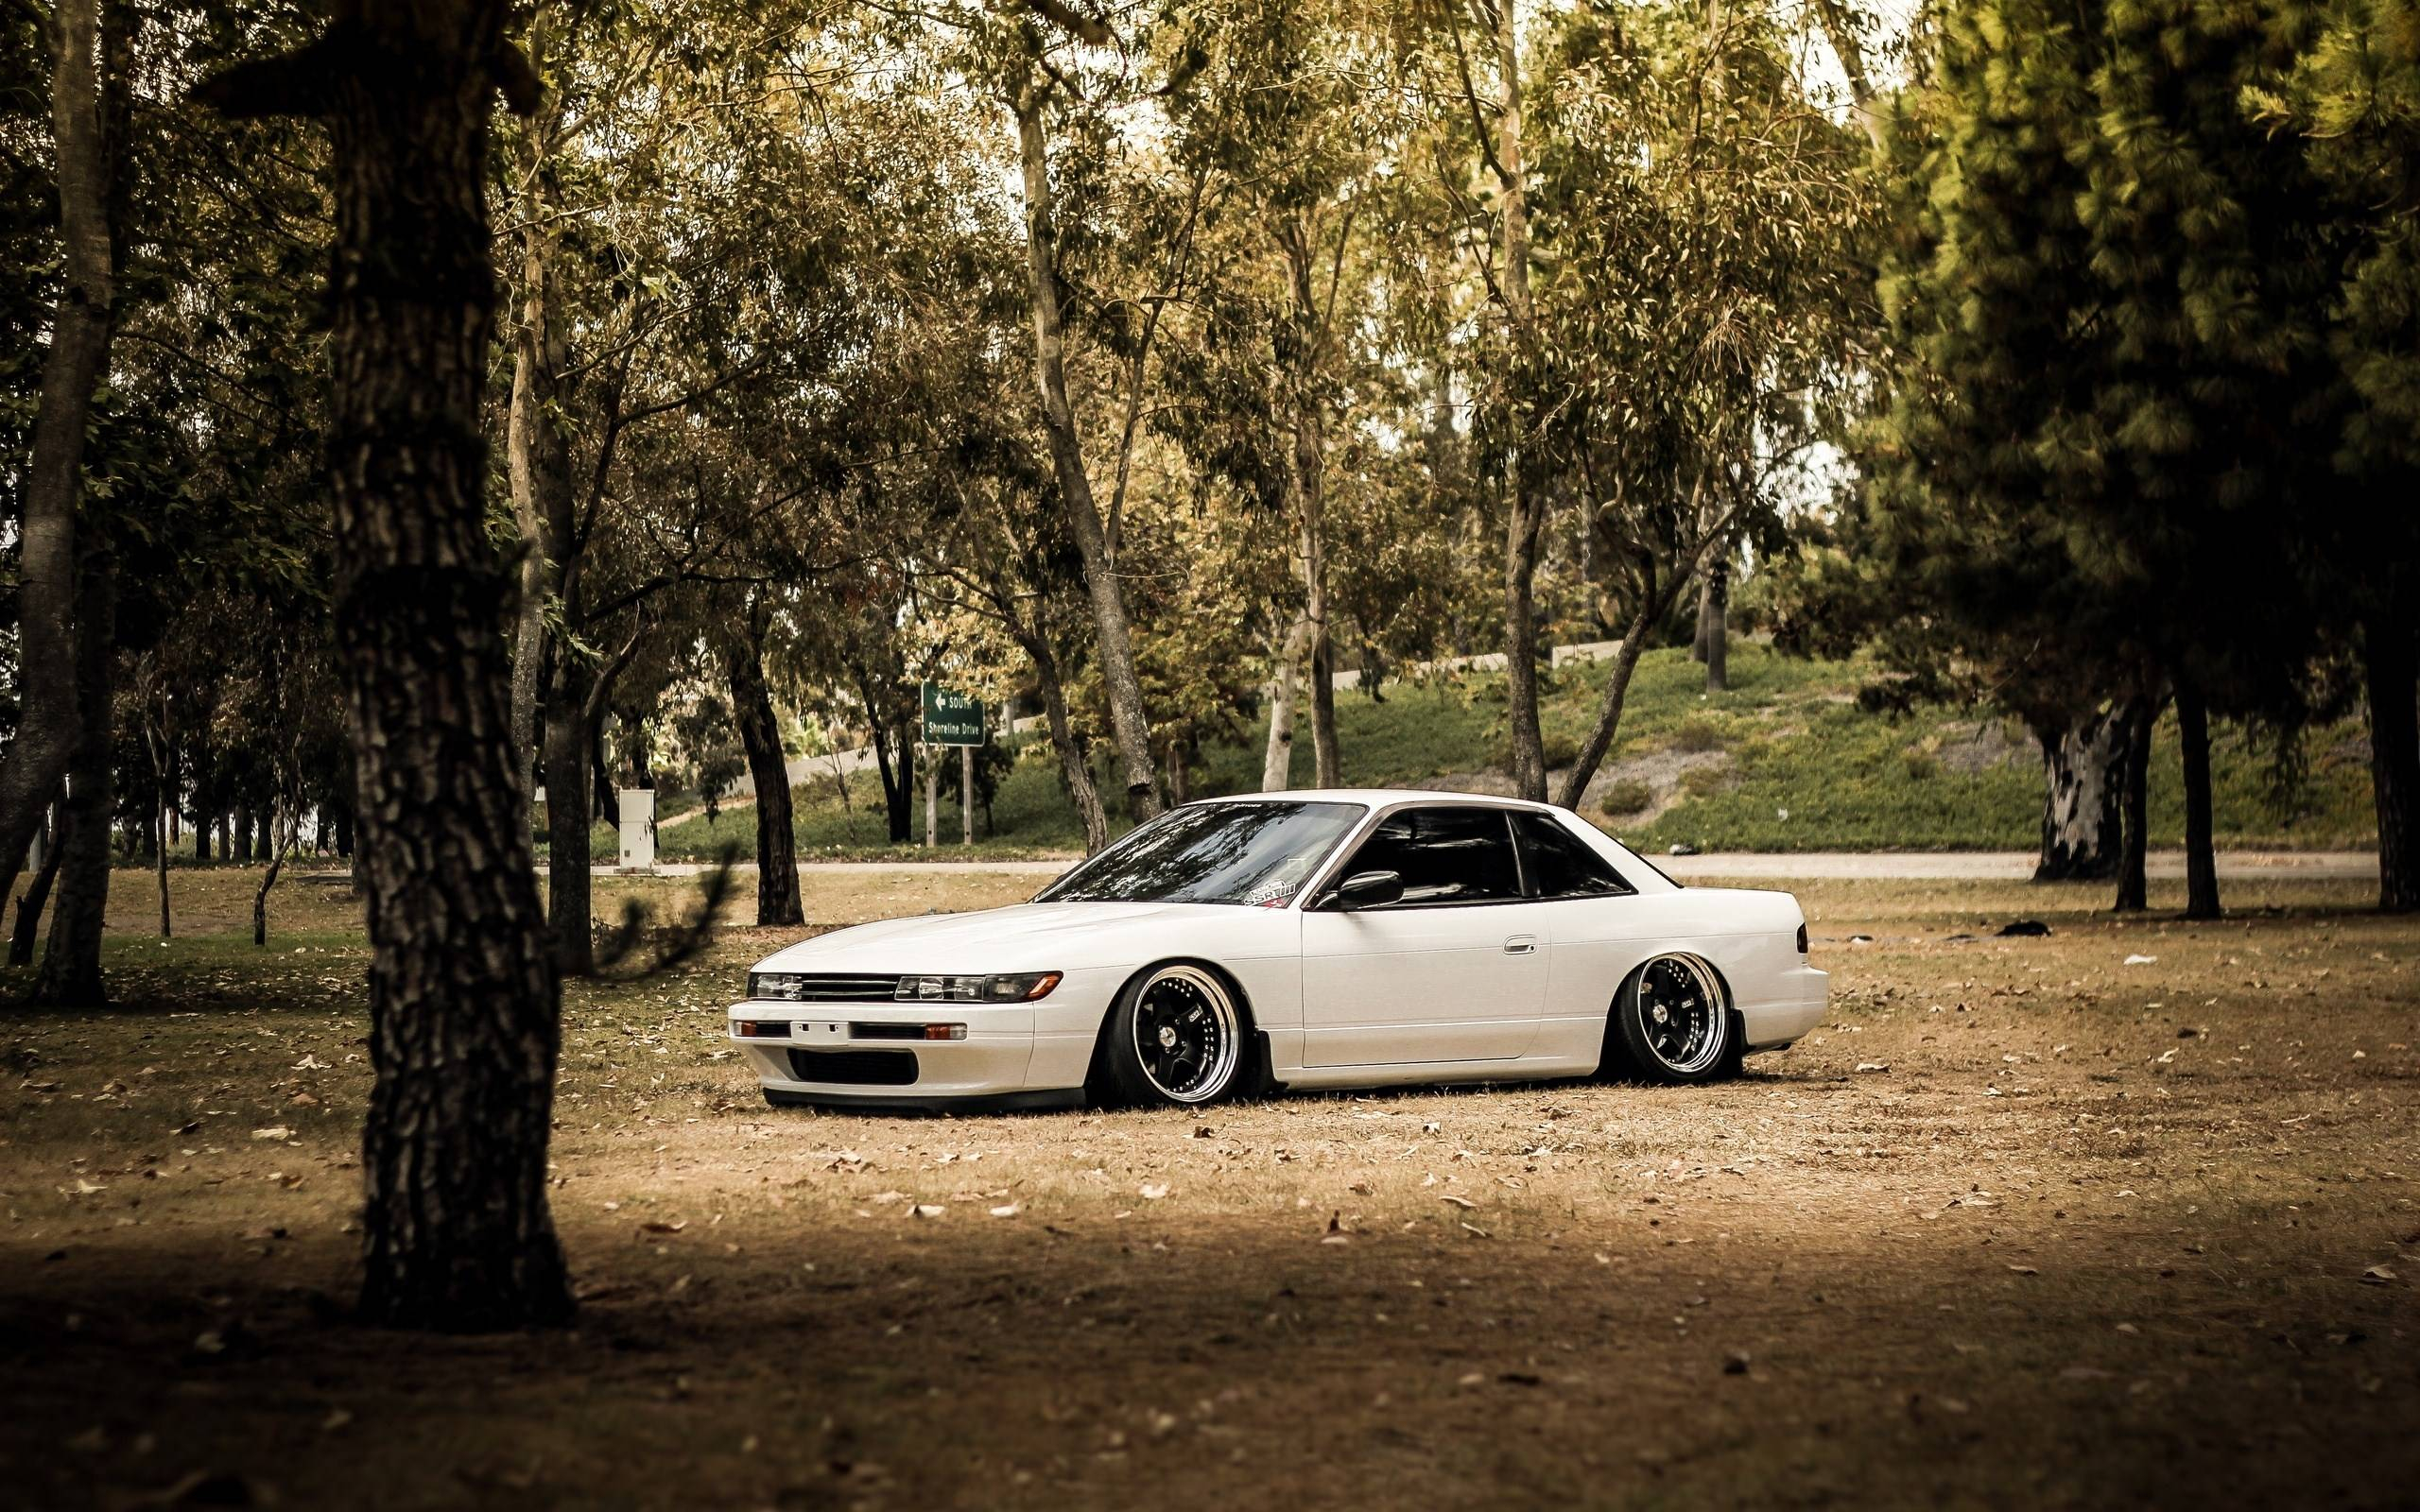 2560x1600 Nissan Silvia S13 Wallpapers Top Free Nissan Silvia S13 Backgrounds